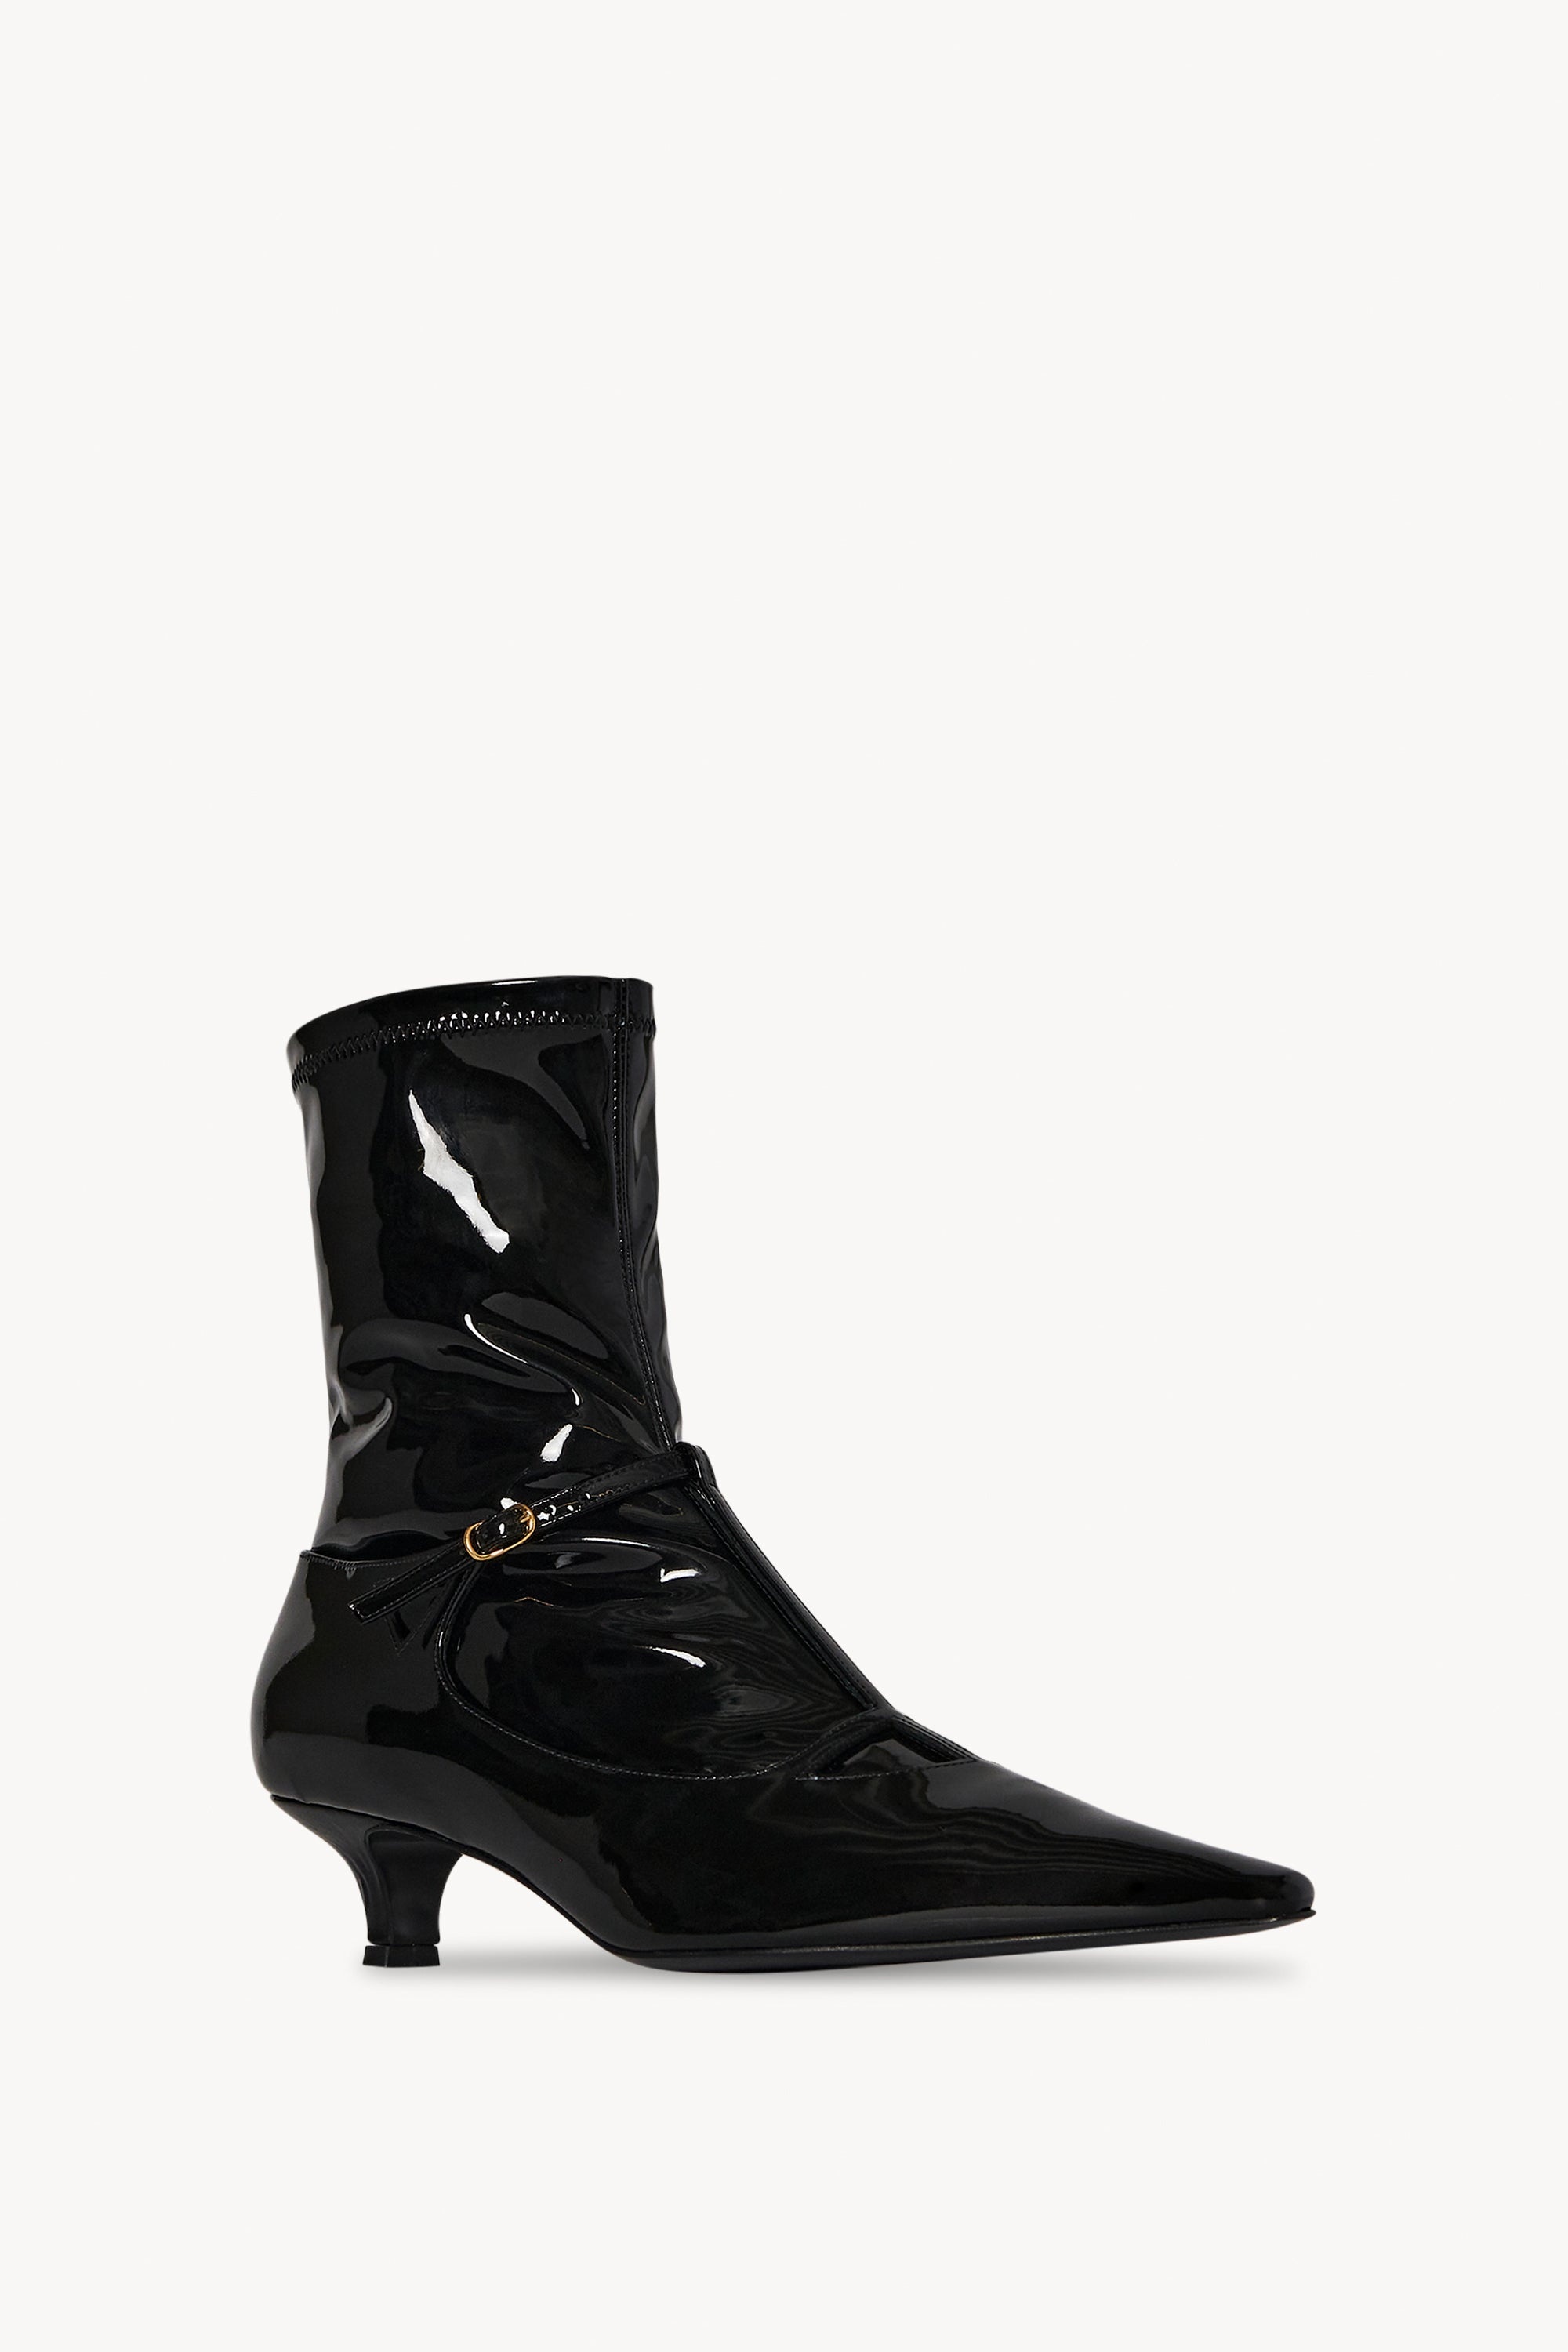 Cyd Boot in Patent Leather - 2